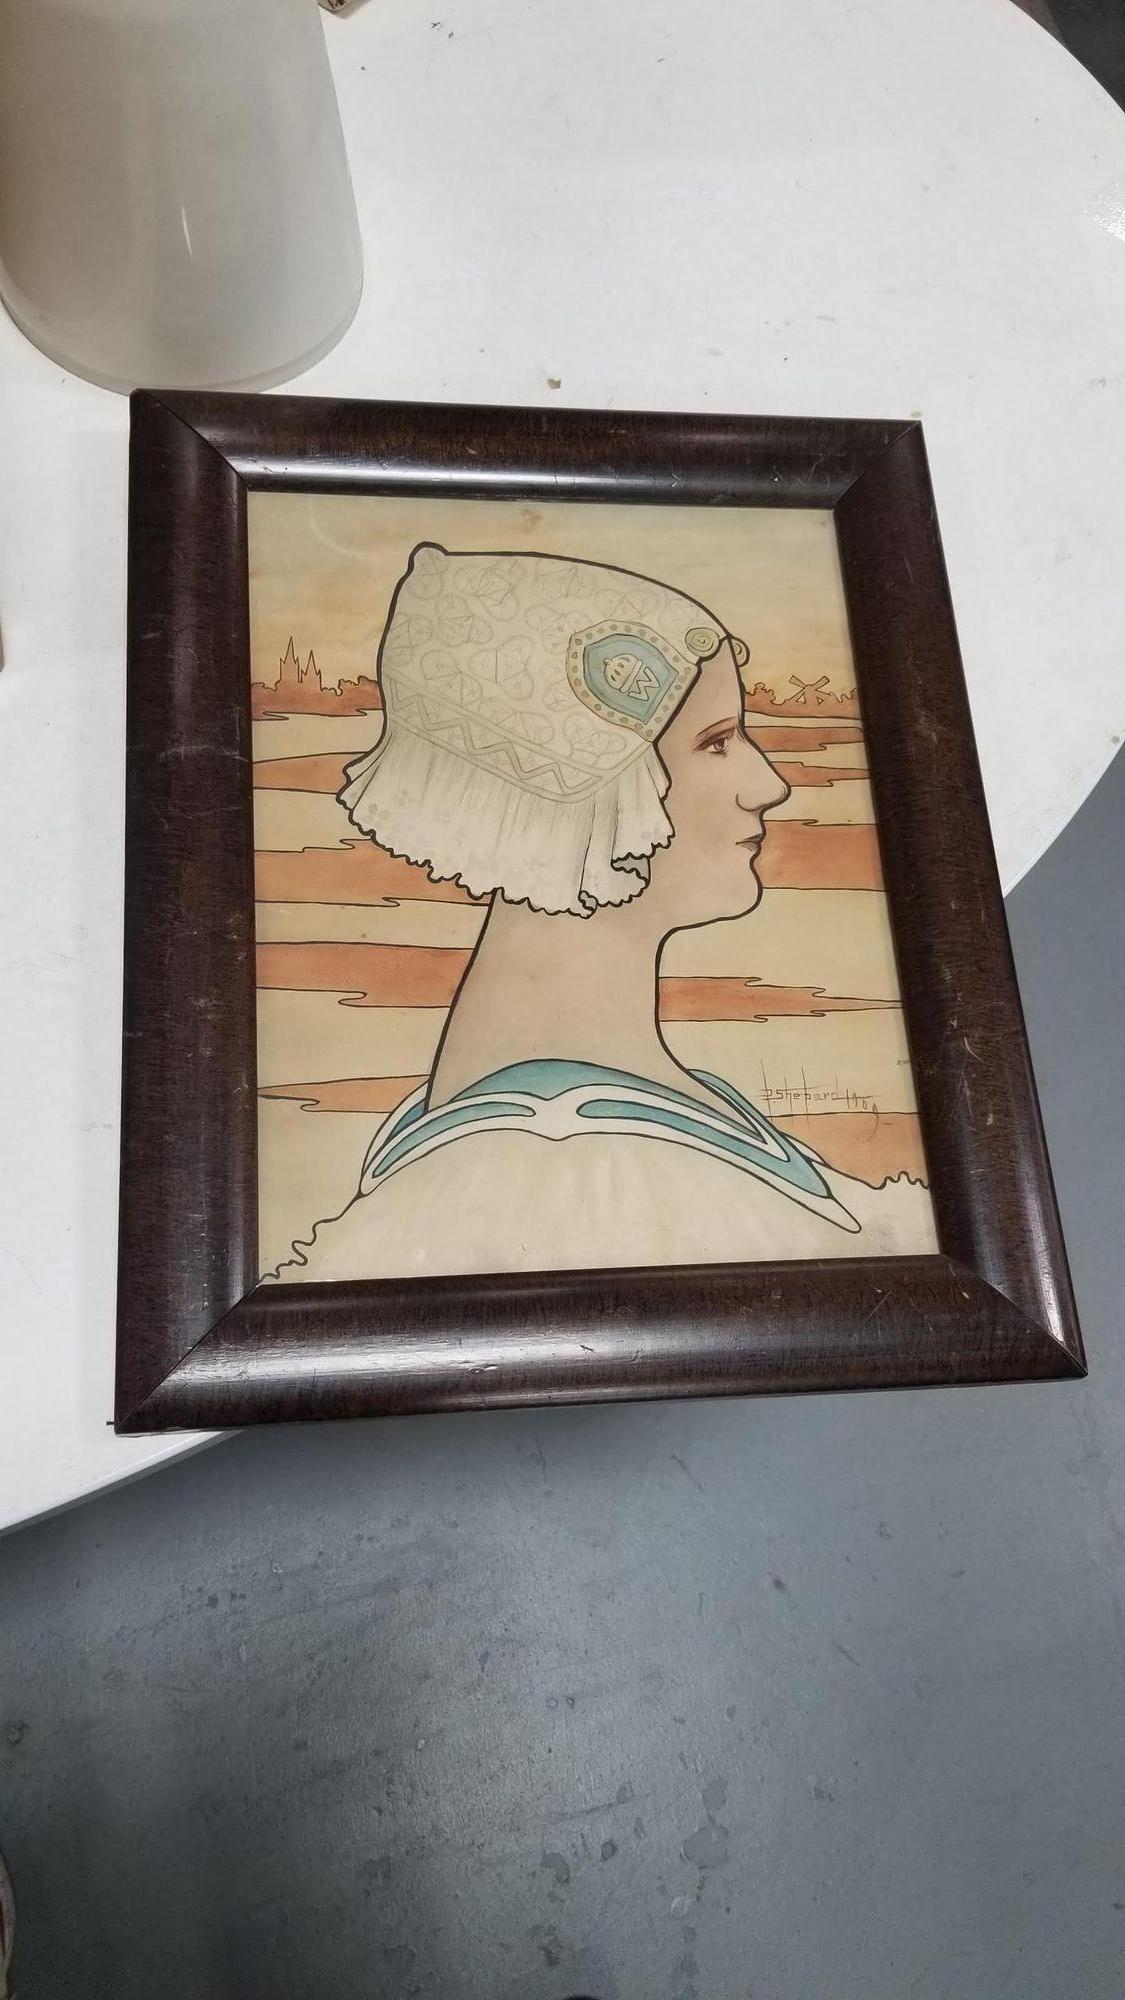 This is an original Art Nouveau-era promo artwork lithograph by P. Shepard of Queen Wilhelmina signed by artist P. Shepard and dated 1909.

Queen Wilhelmina, reigning over the Netherlands from 1890 to 1948, steered her nation through World Wars and